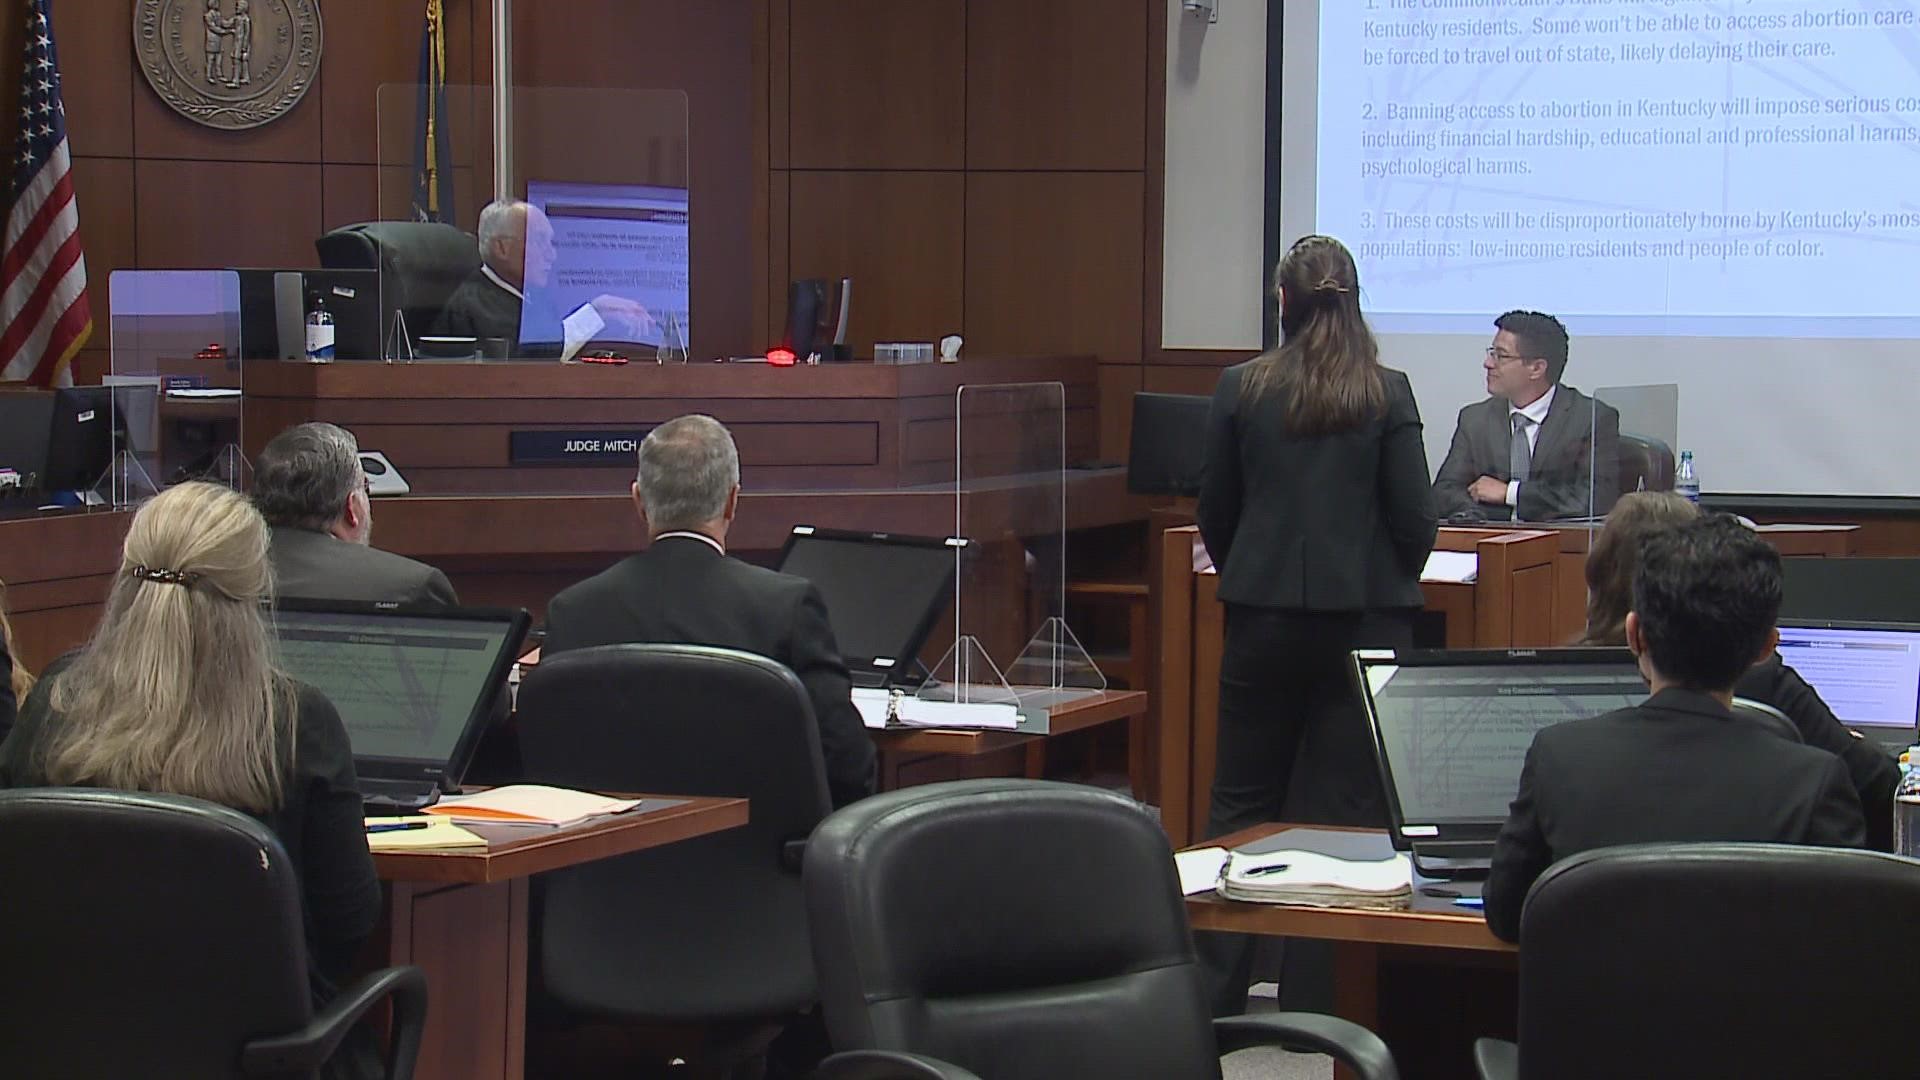 The judge told both the defense and prosecution they need to file written briefs arguing their positions by July 18.